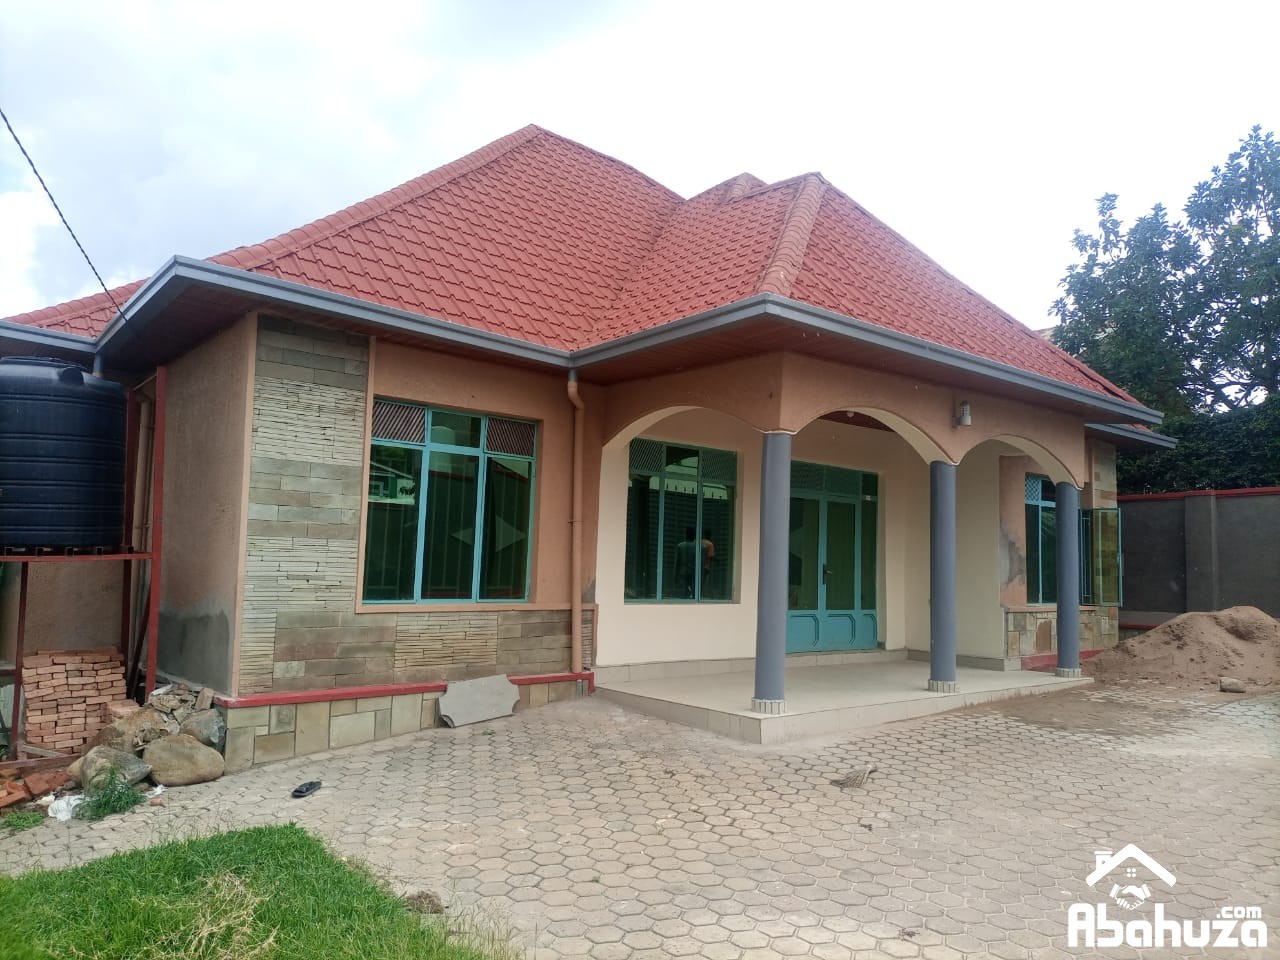 A 4 BEDROOM HOUSE FOR RENT IN KIGALI AT KACYIRU